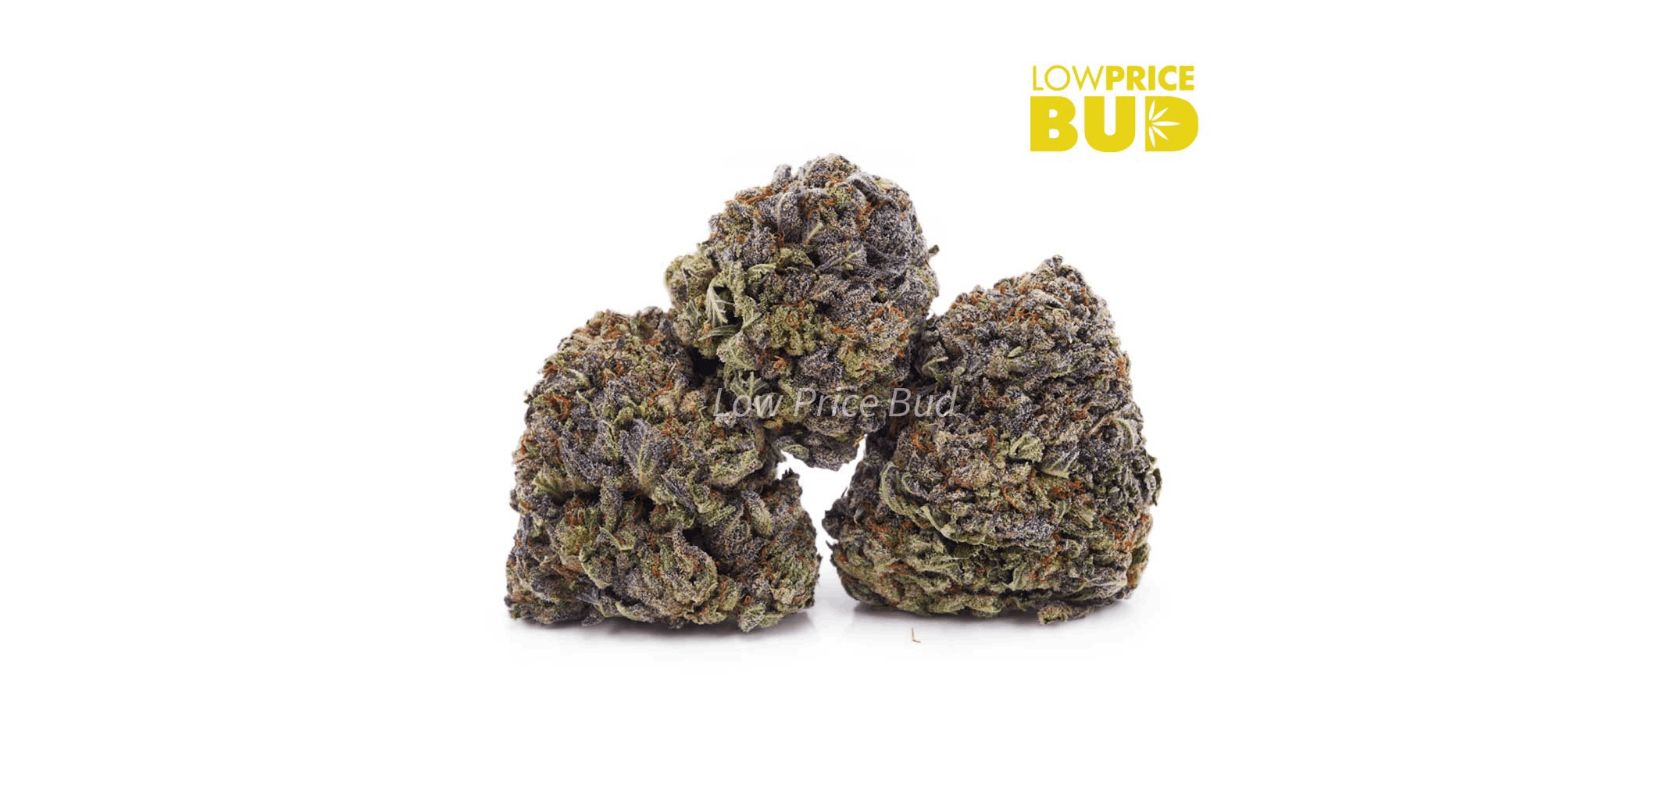 Low Price Bud is the go-to place to get some high-quality Cali Bubba weed nugs. Buy weed online like Cali Bubba and never look back!